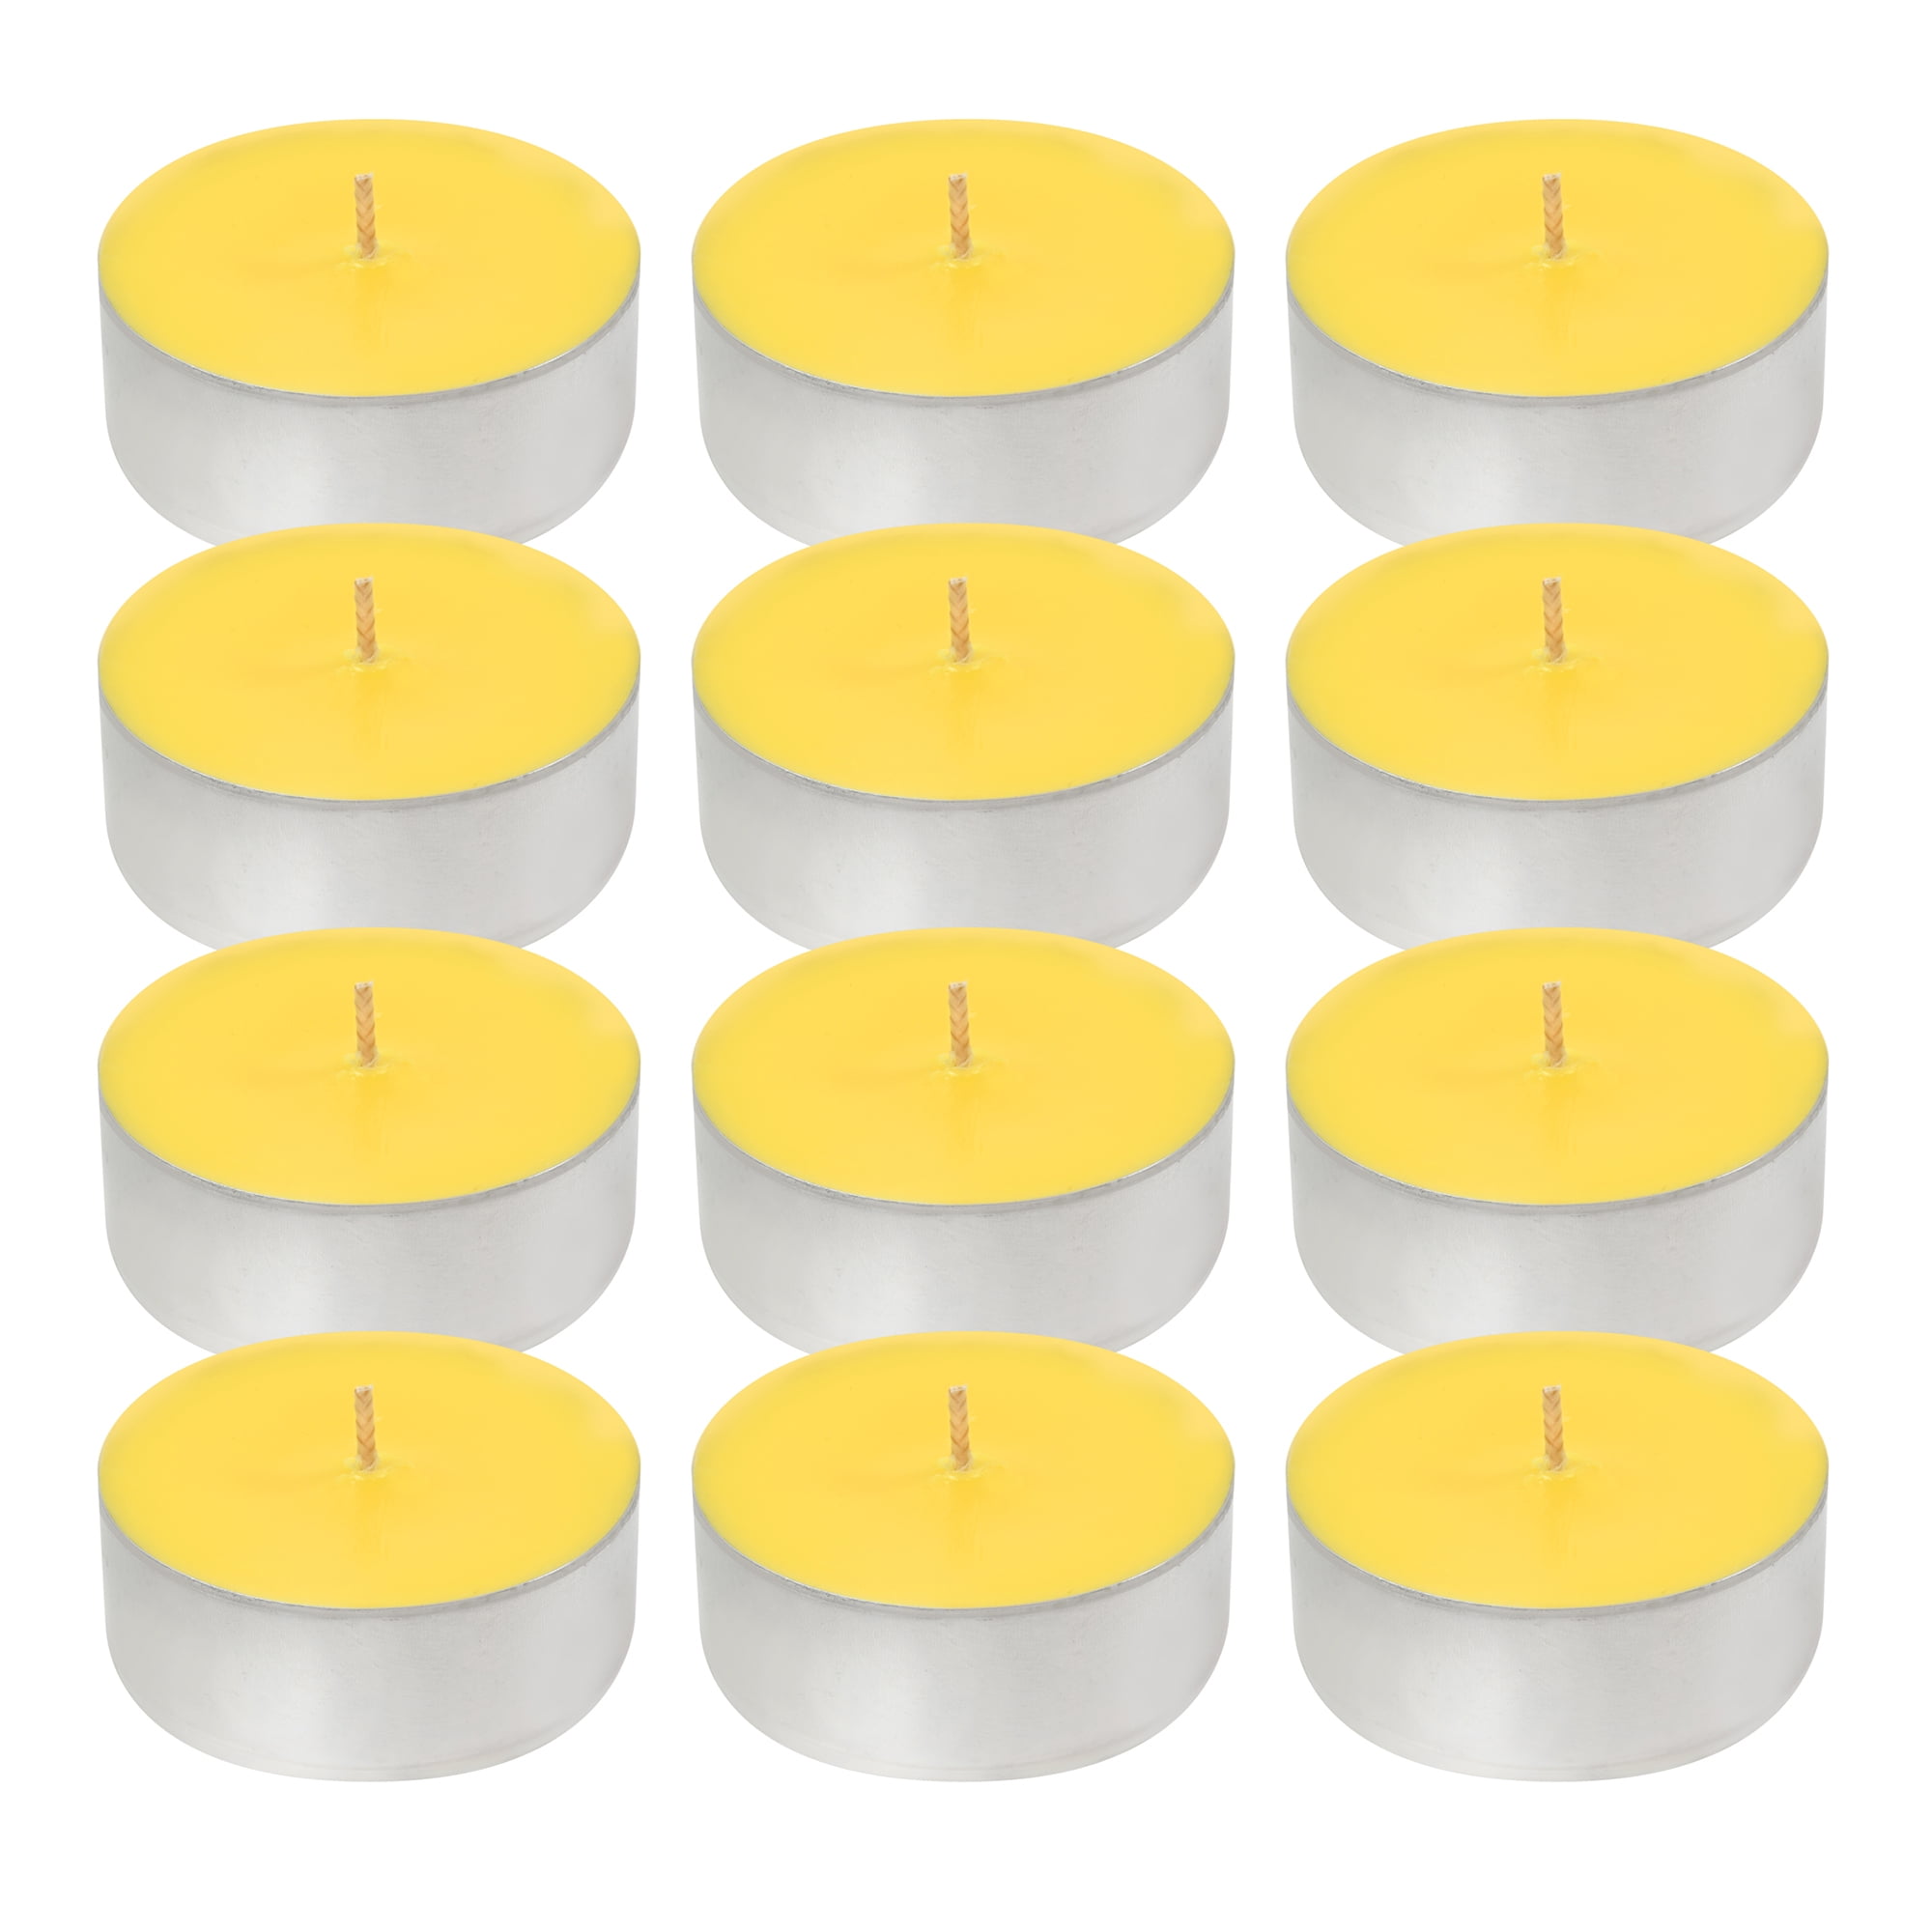 50 75 1 100 PRICES CANDLES TEALIGHTS CITRONELLA 25 